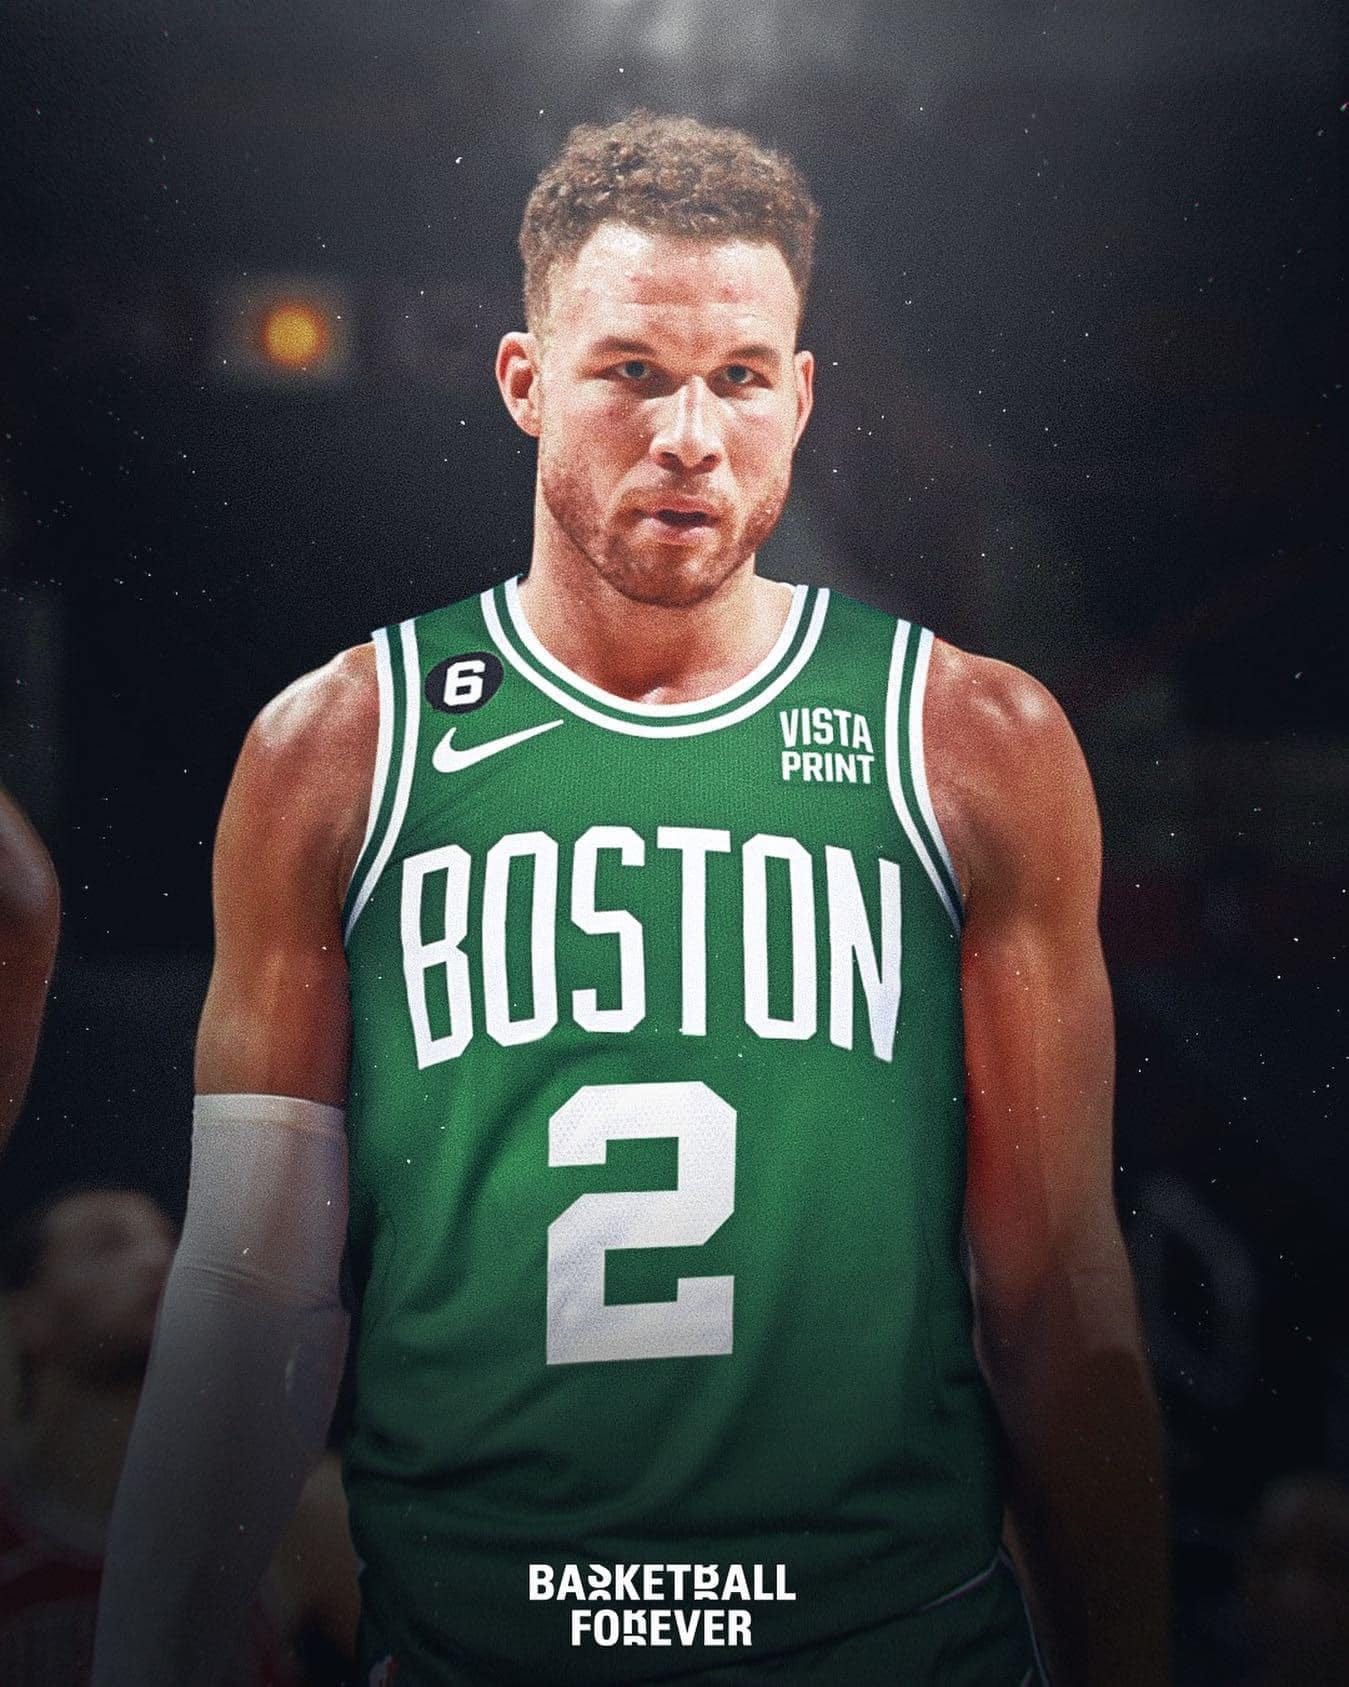 Blake Griffin officially joins Celtics on reported 1-year deal